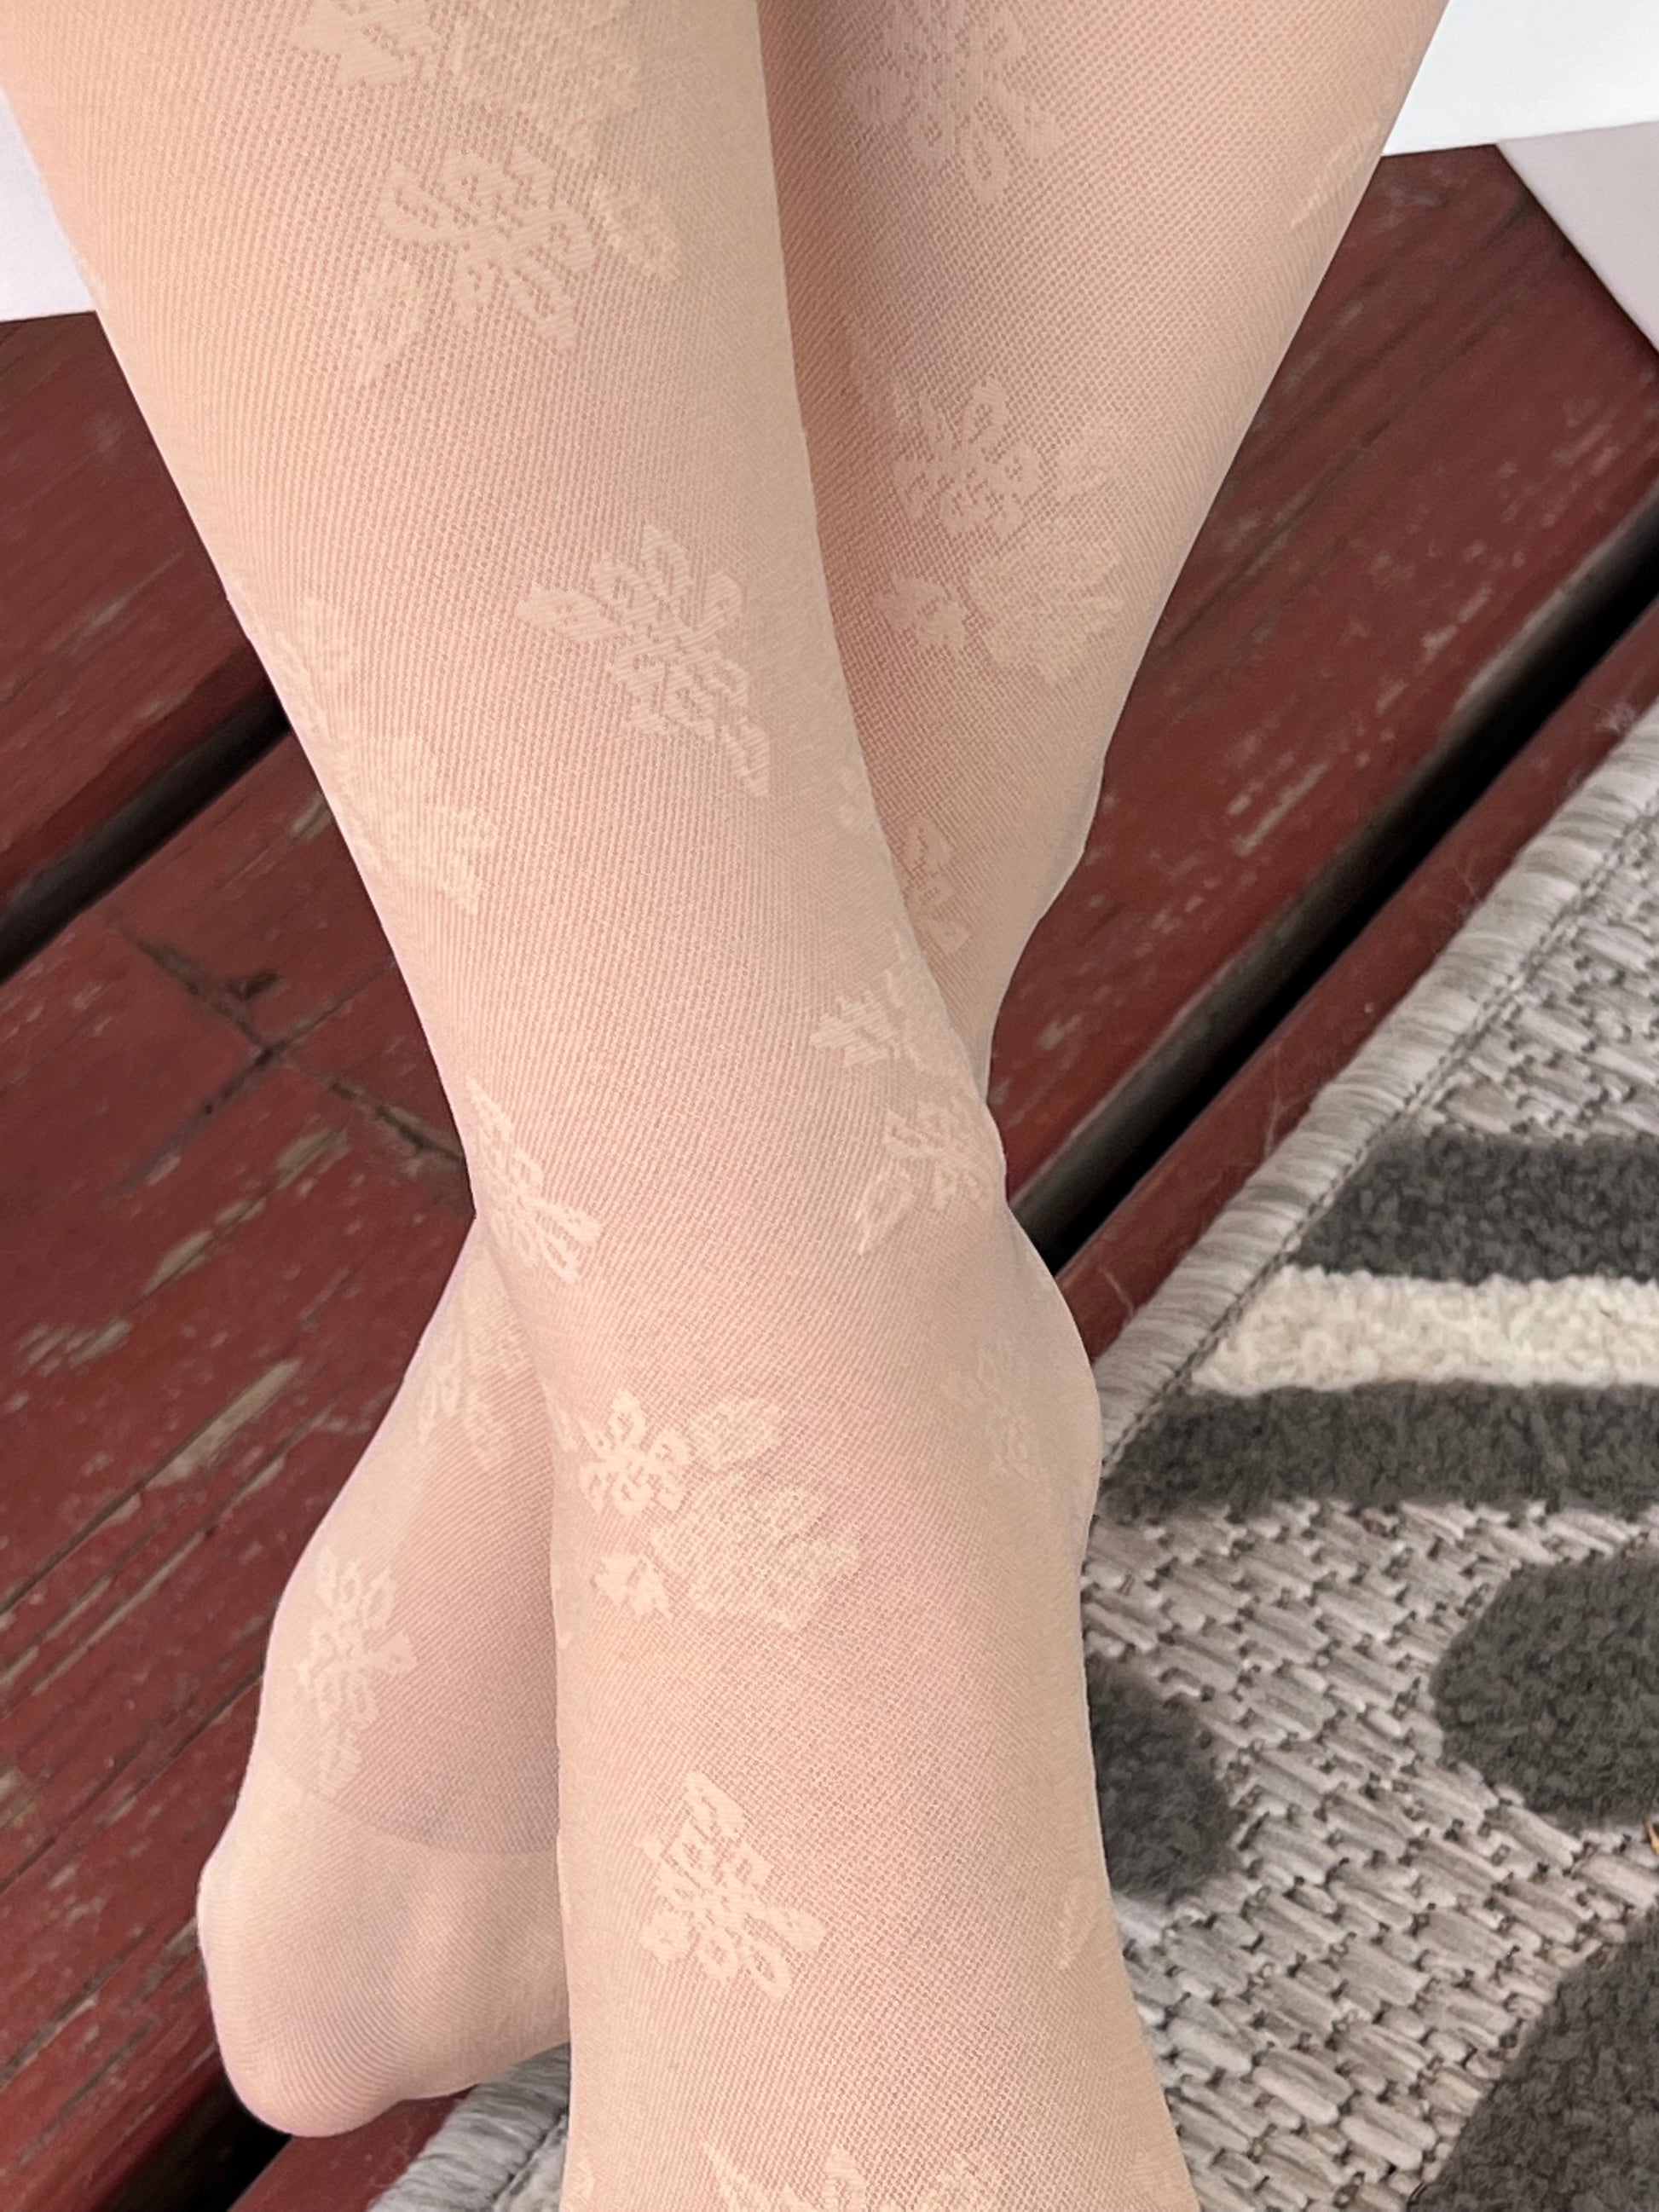 Floral lace-like tights